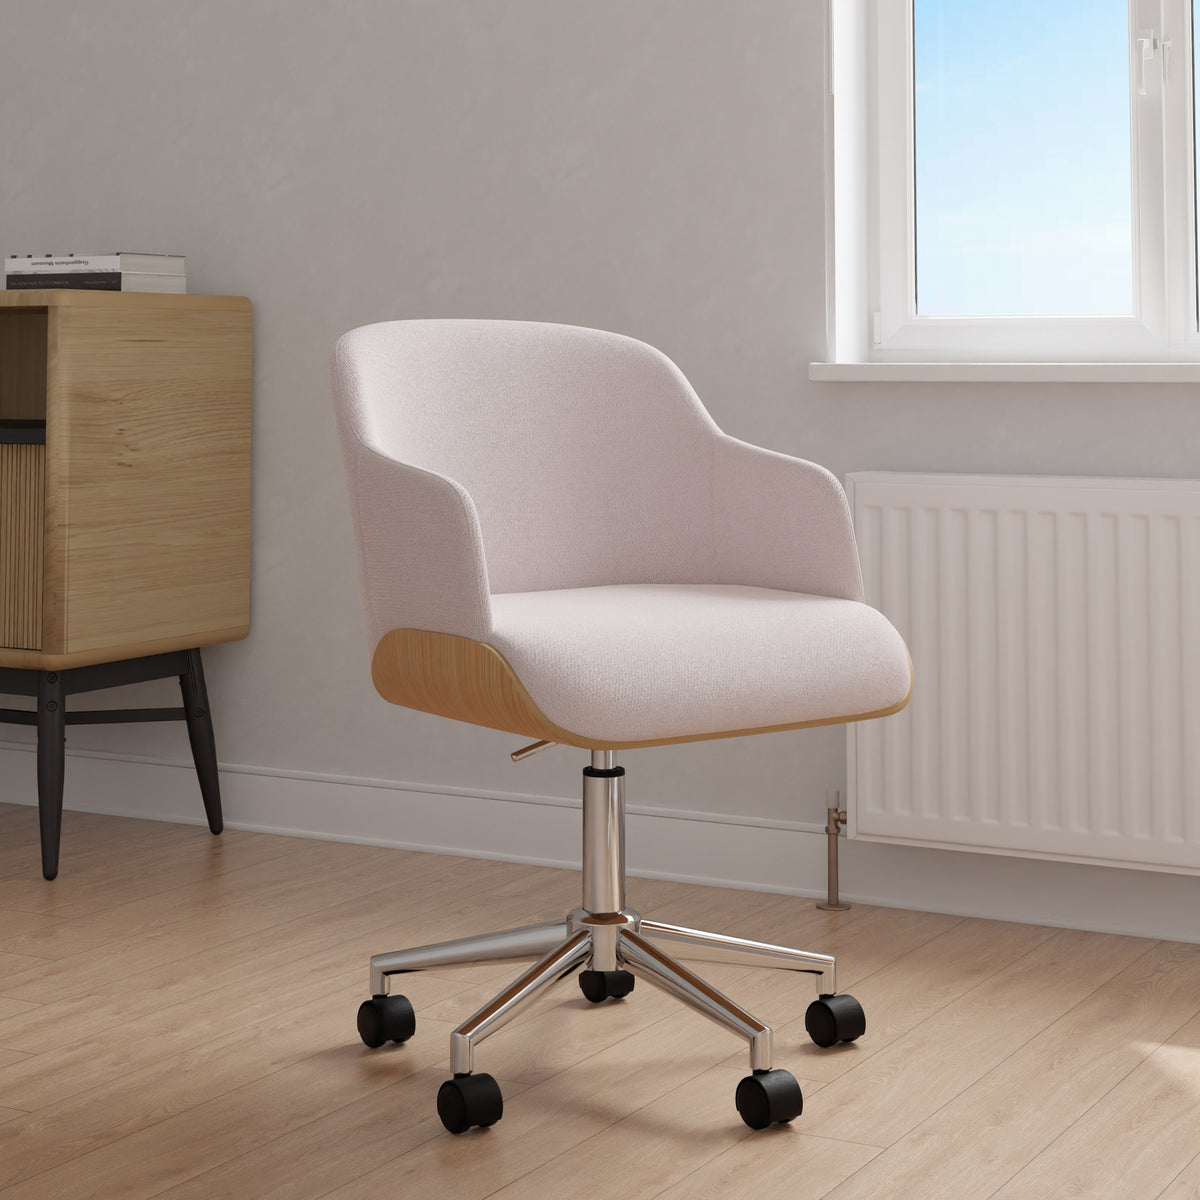 Hedda Height Adjustable Swivel Office Chair for office